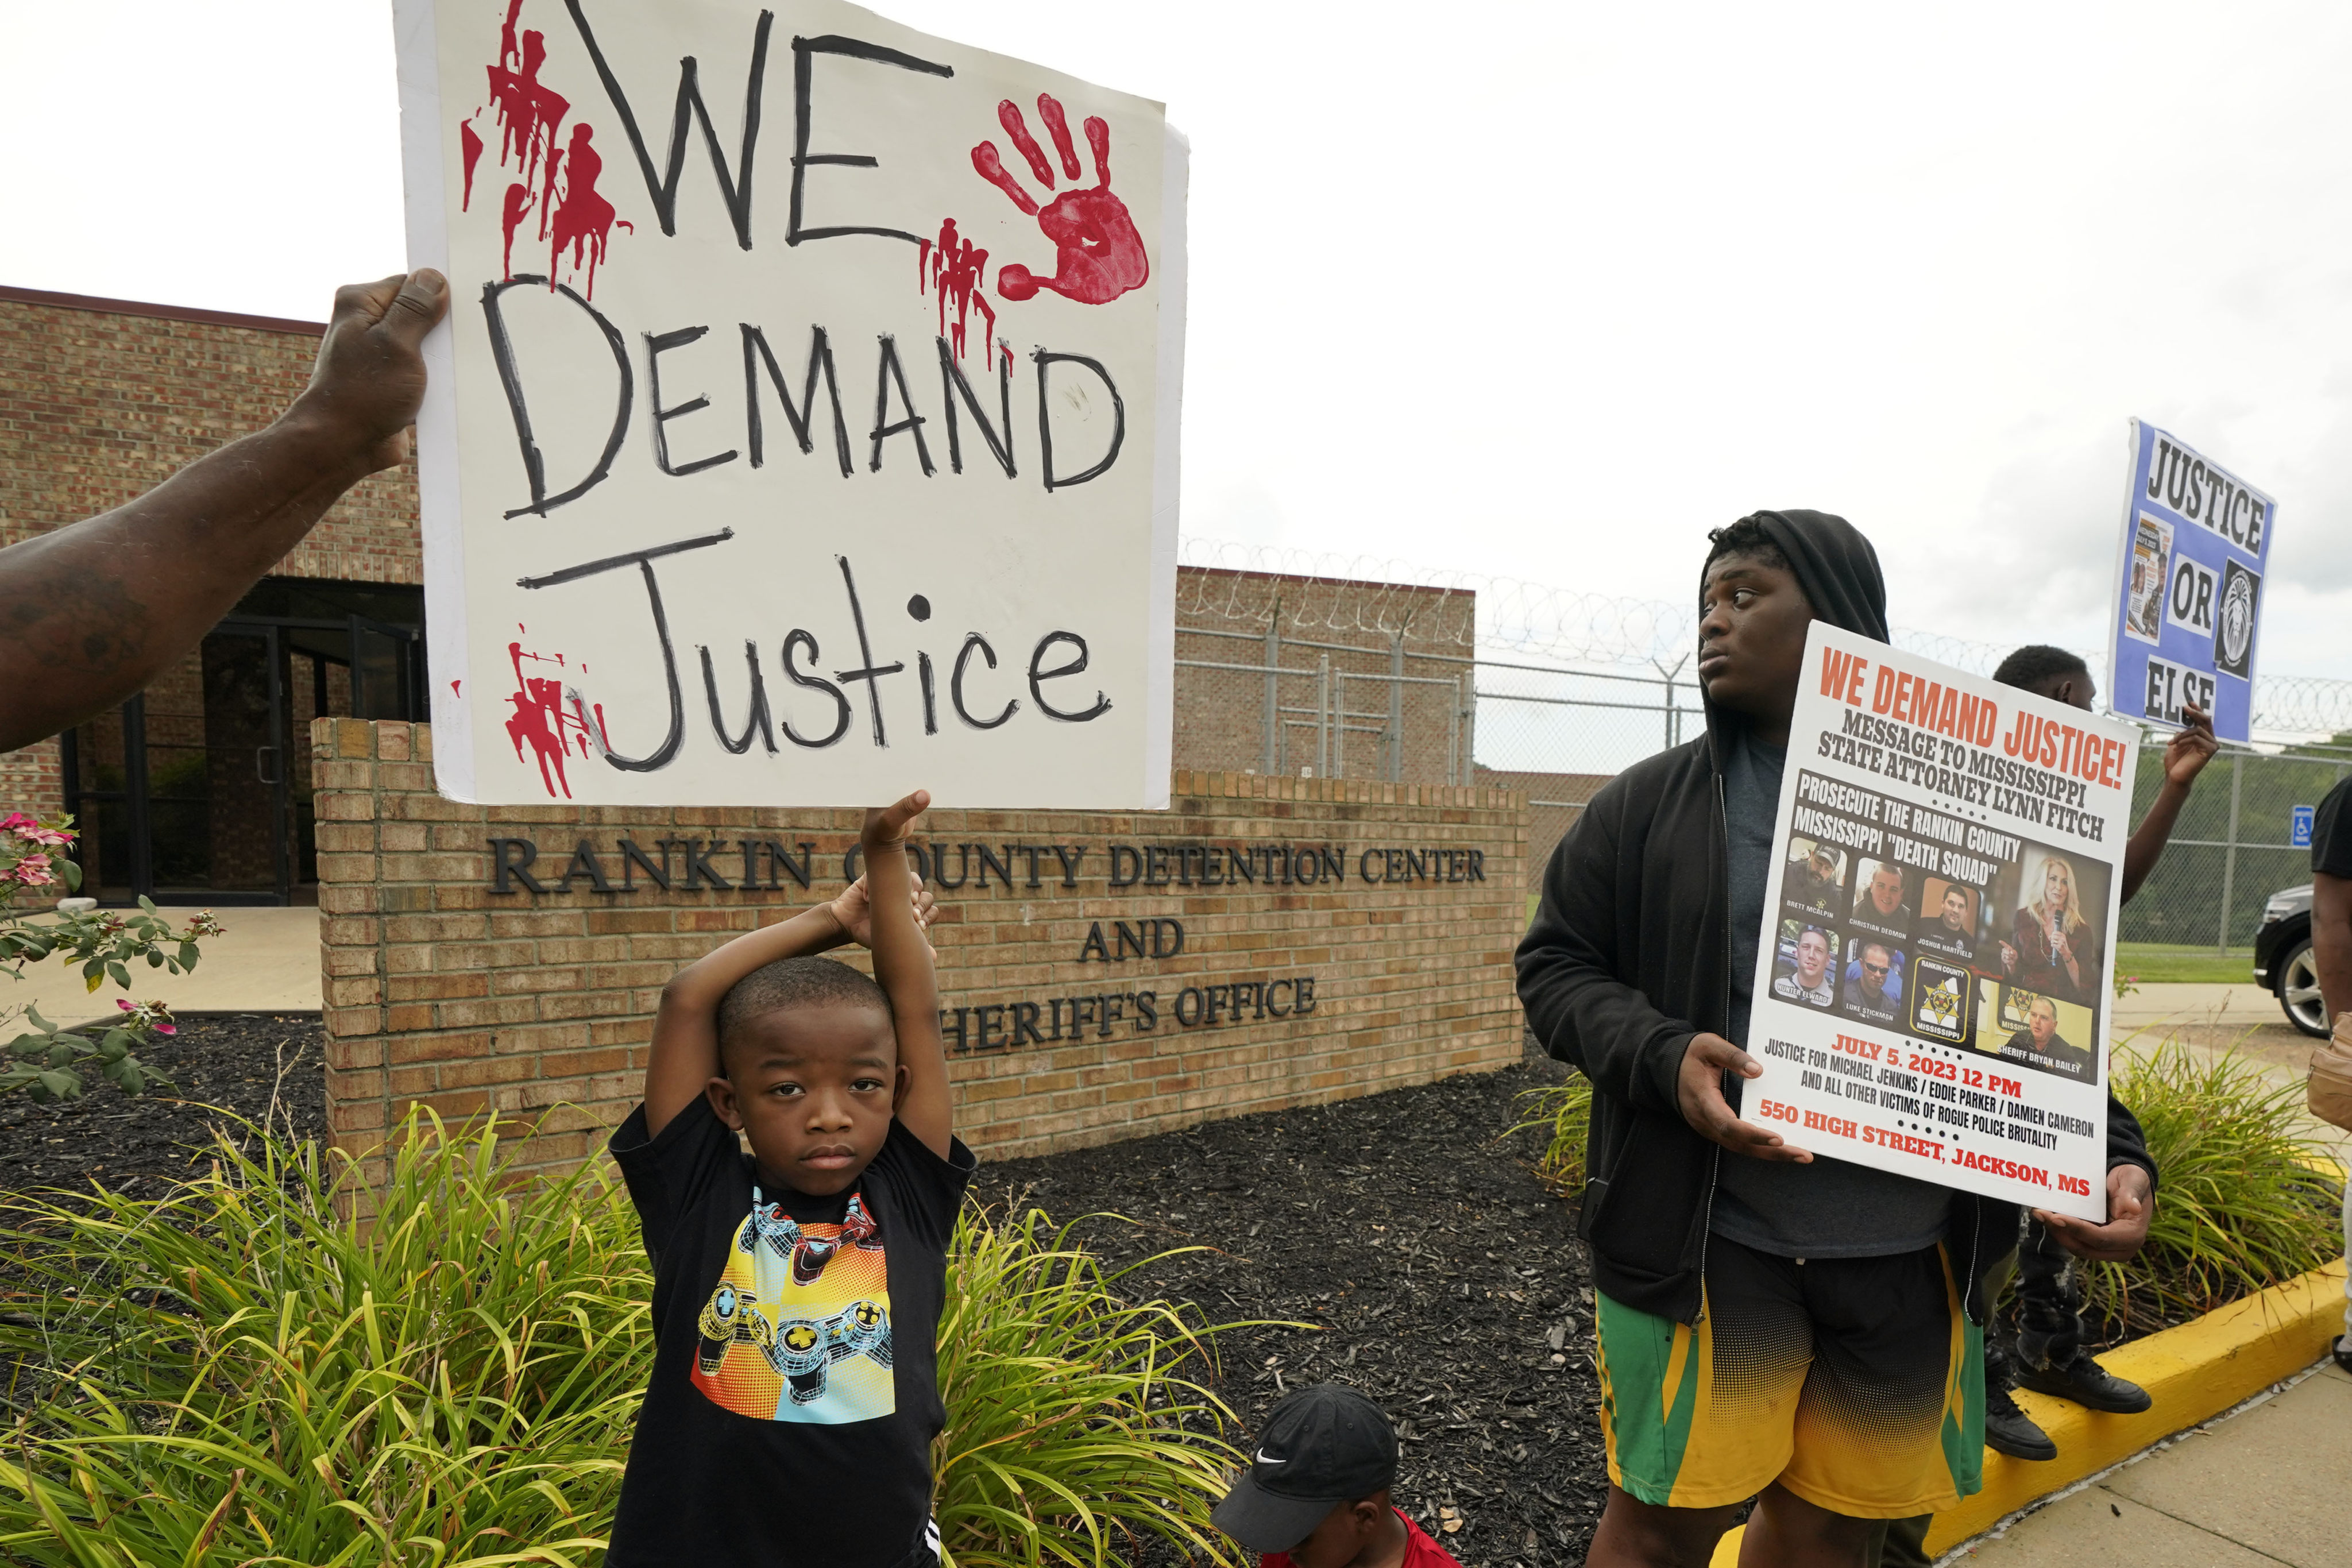 Anti-police brutality activists protest outside the Rankin County Sheriff’s Office, where the officers were based, last month. Photo: AP